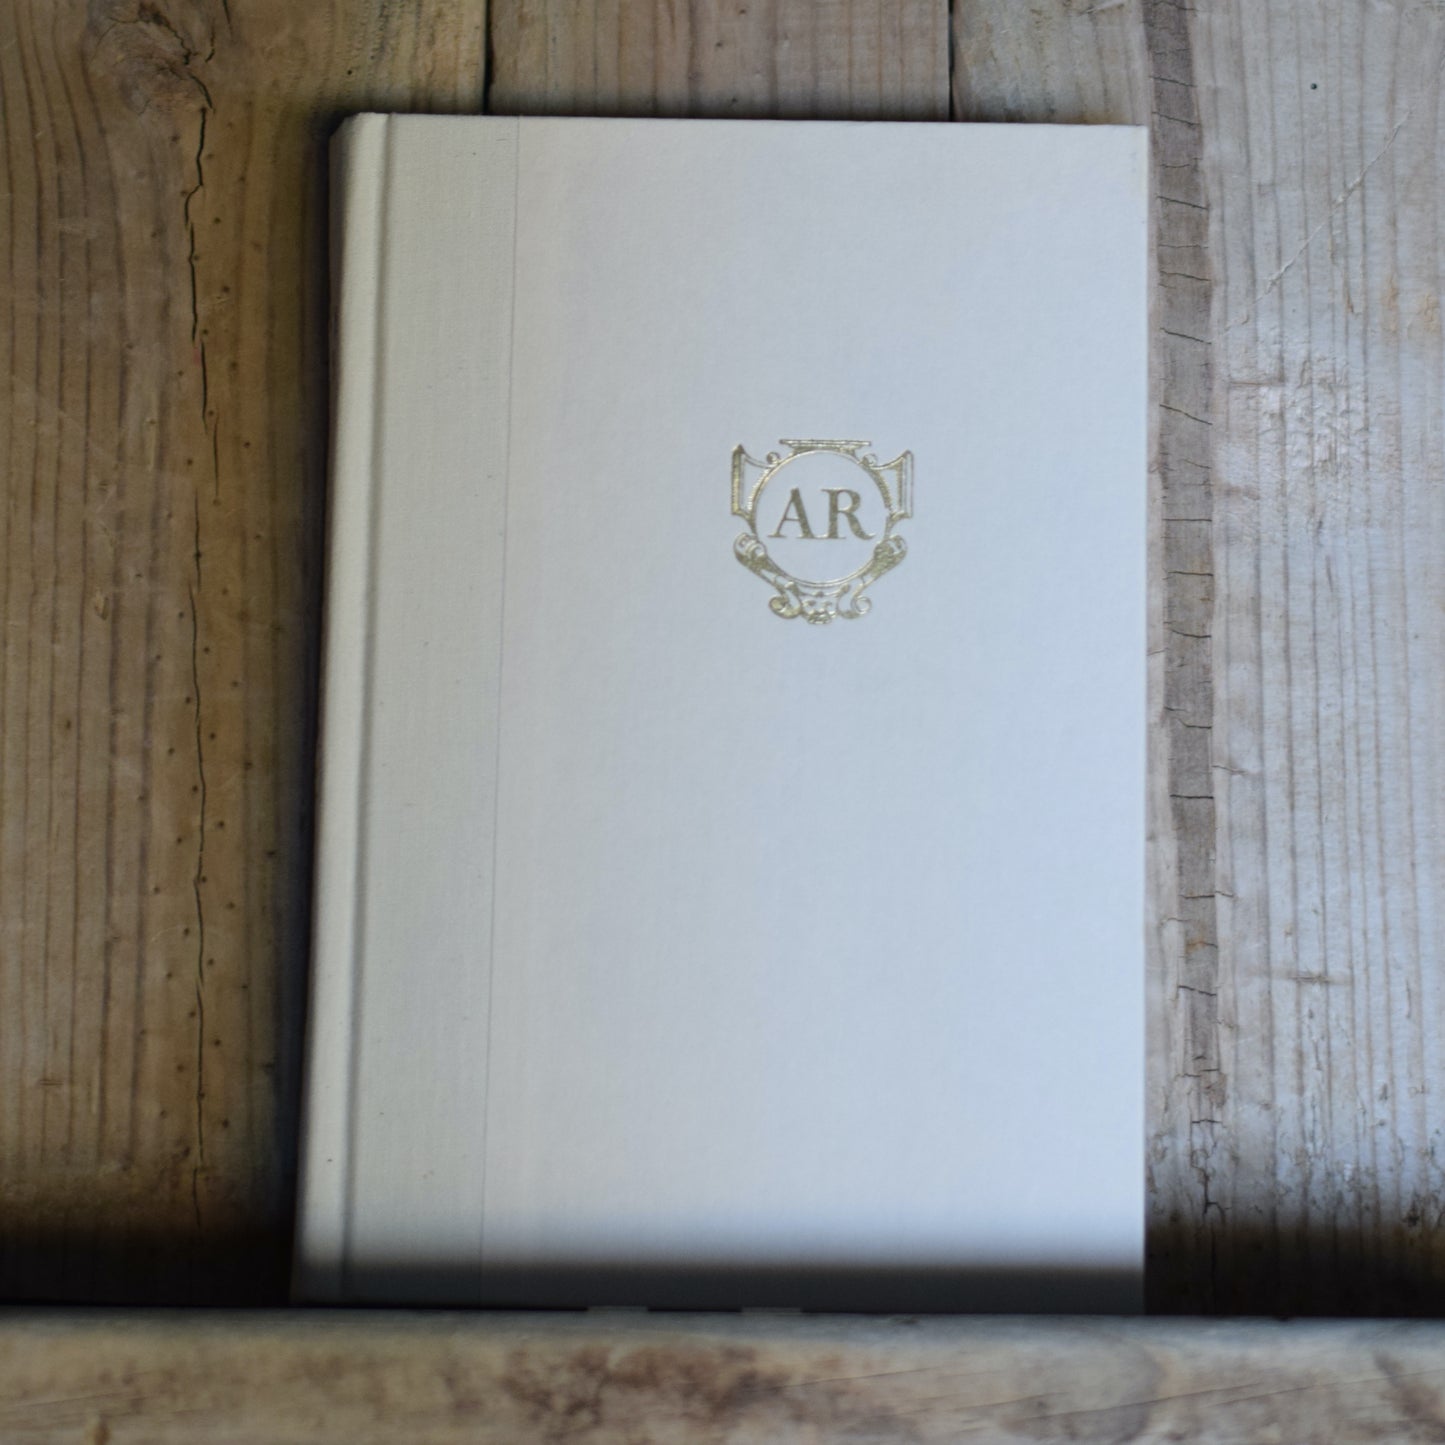 Vintage Horror Hardback: Anne Rice - The Queen of the Damned SIGNED FIRST EDITION